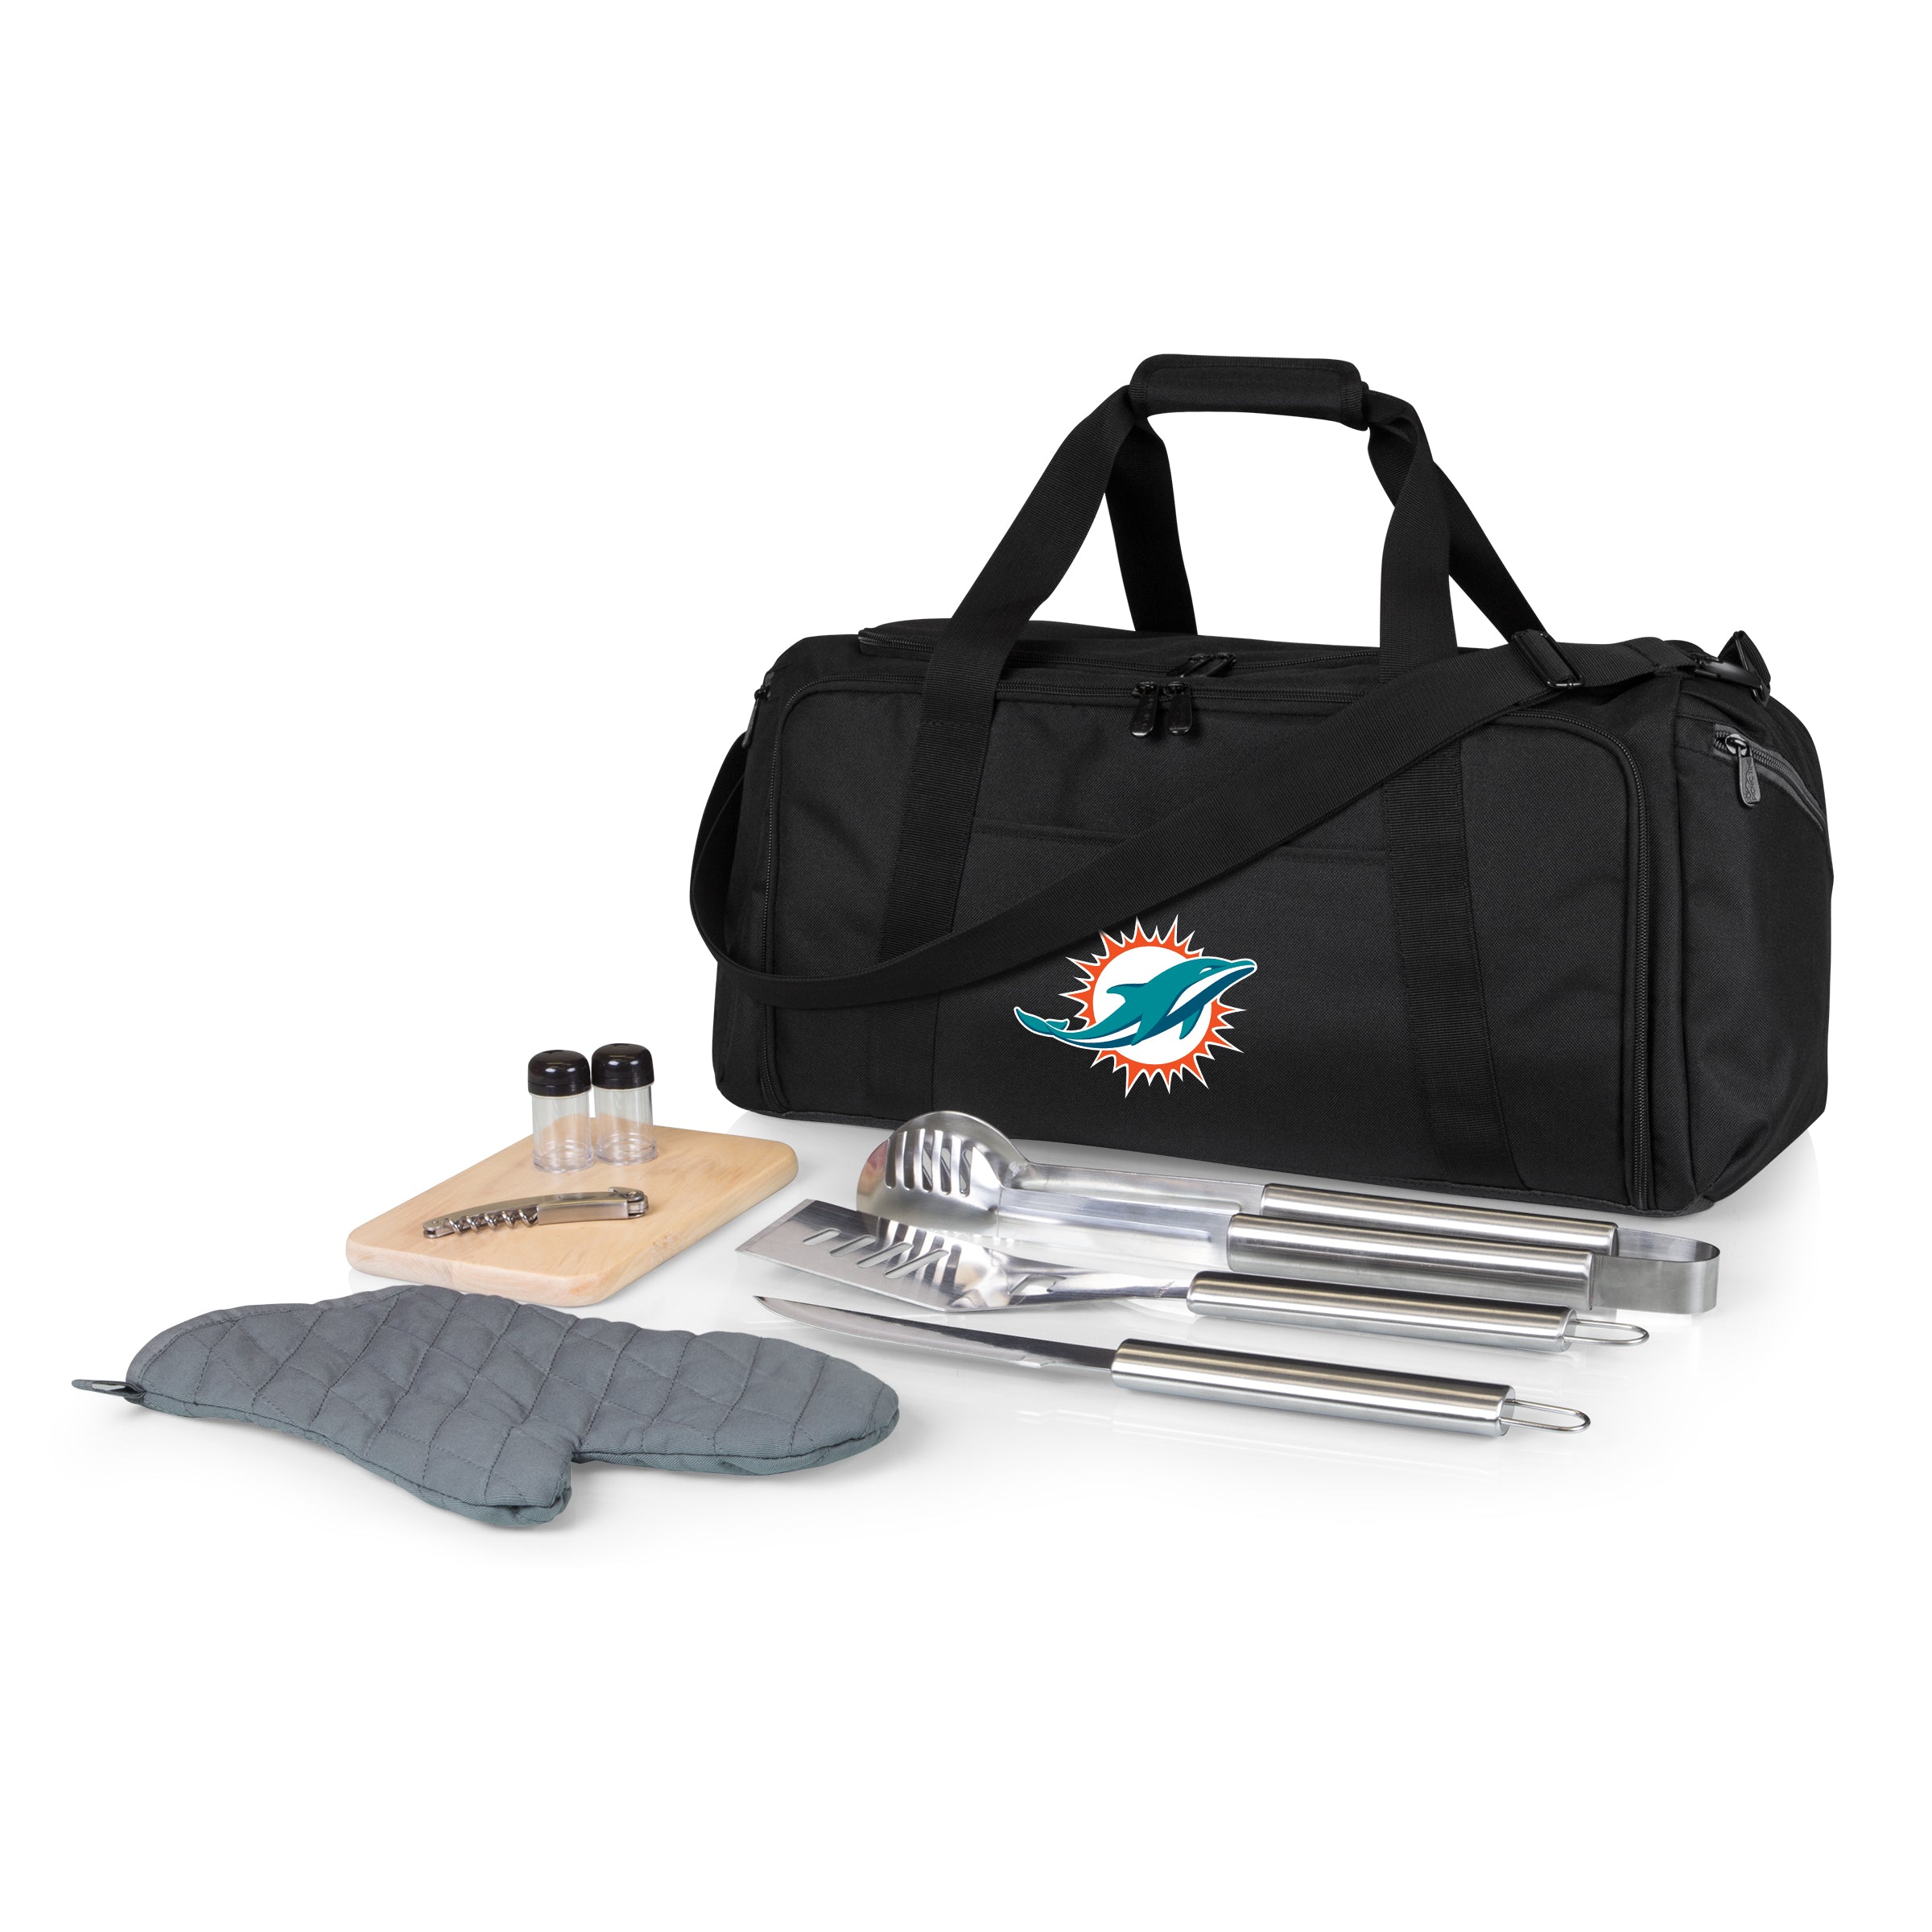 Miami Dolphins - BBQ Kit Grill Set & Cooler